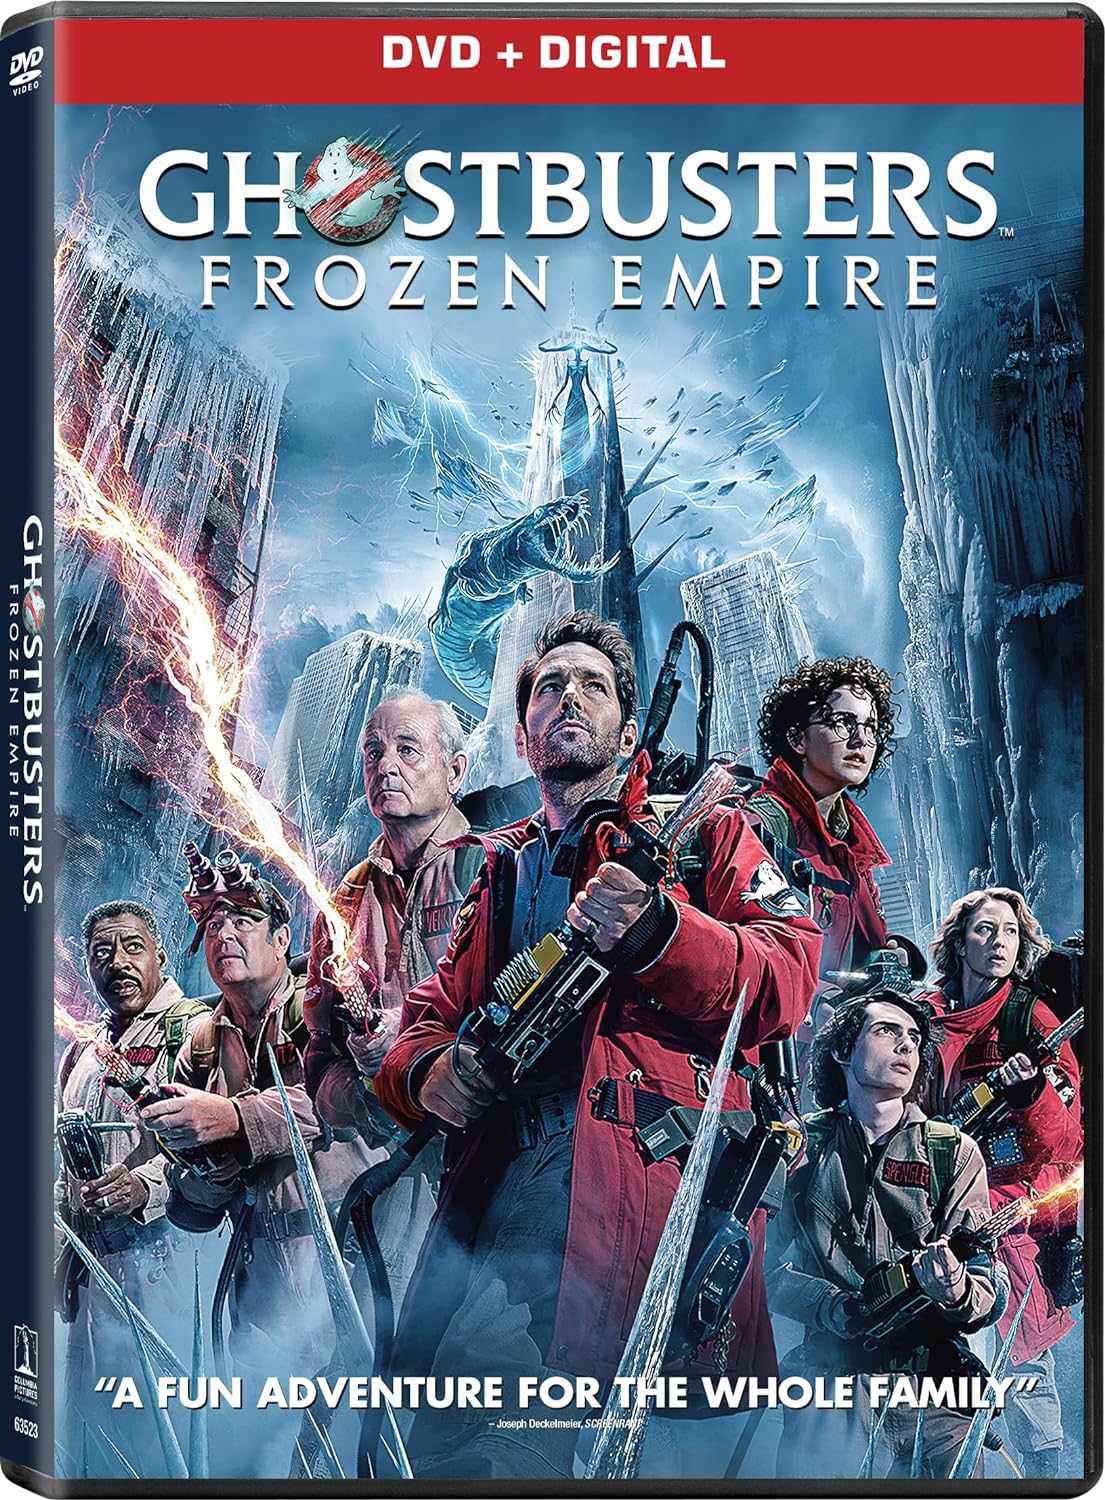 Image for "Ghostbusters. Frozen empire"